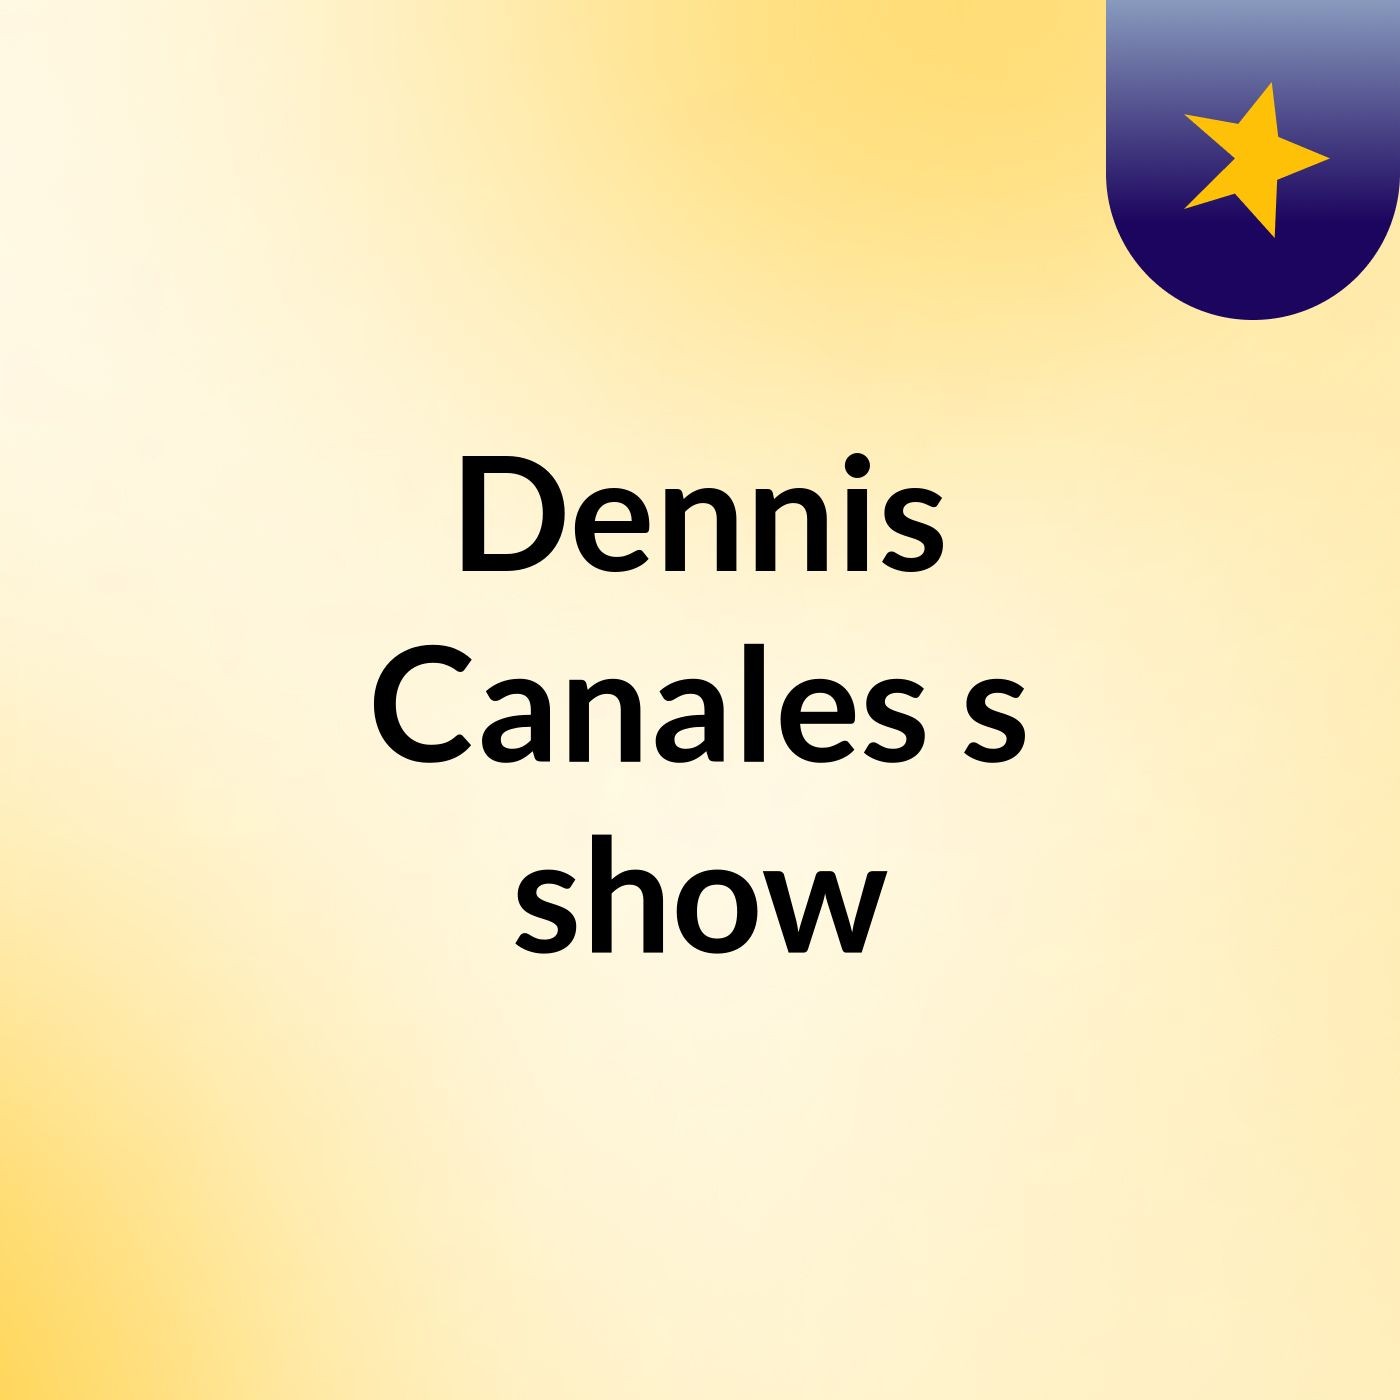 Dennis Canales's show